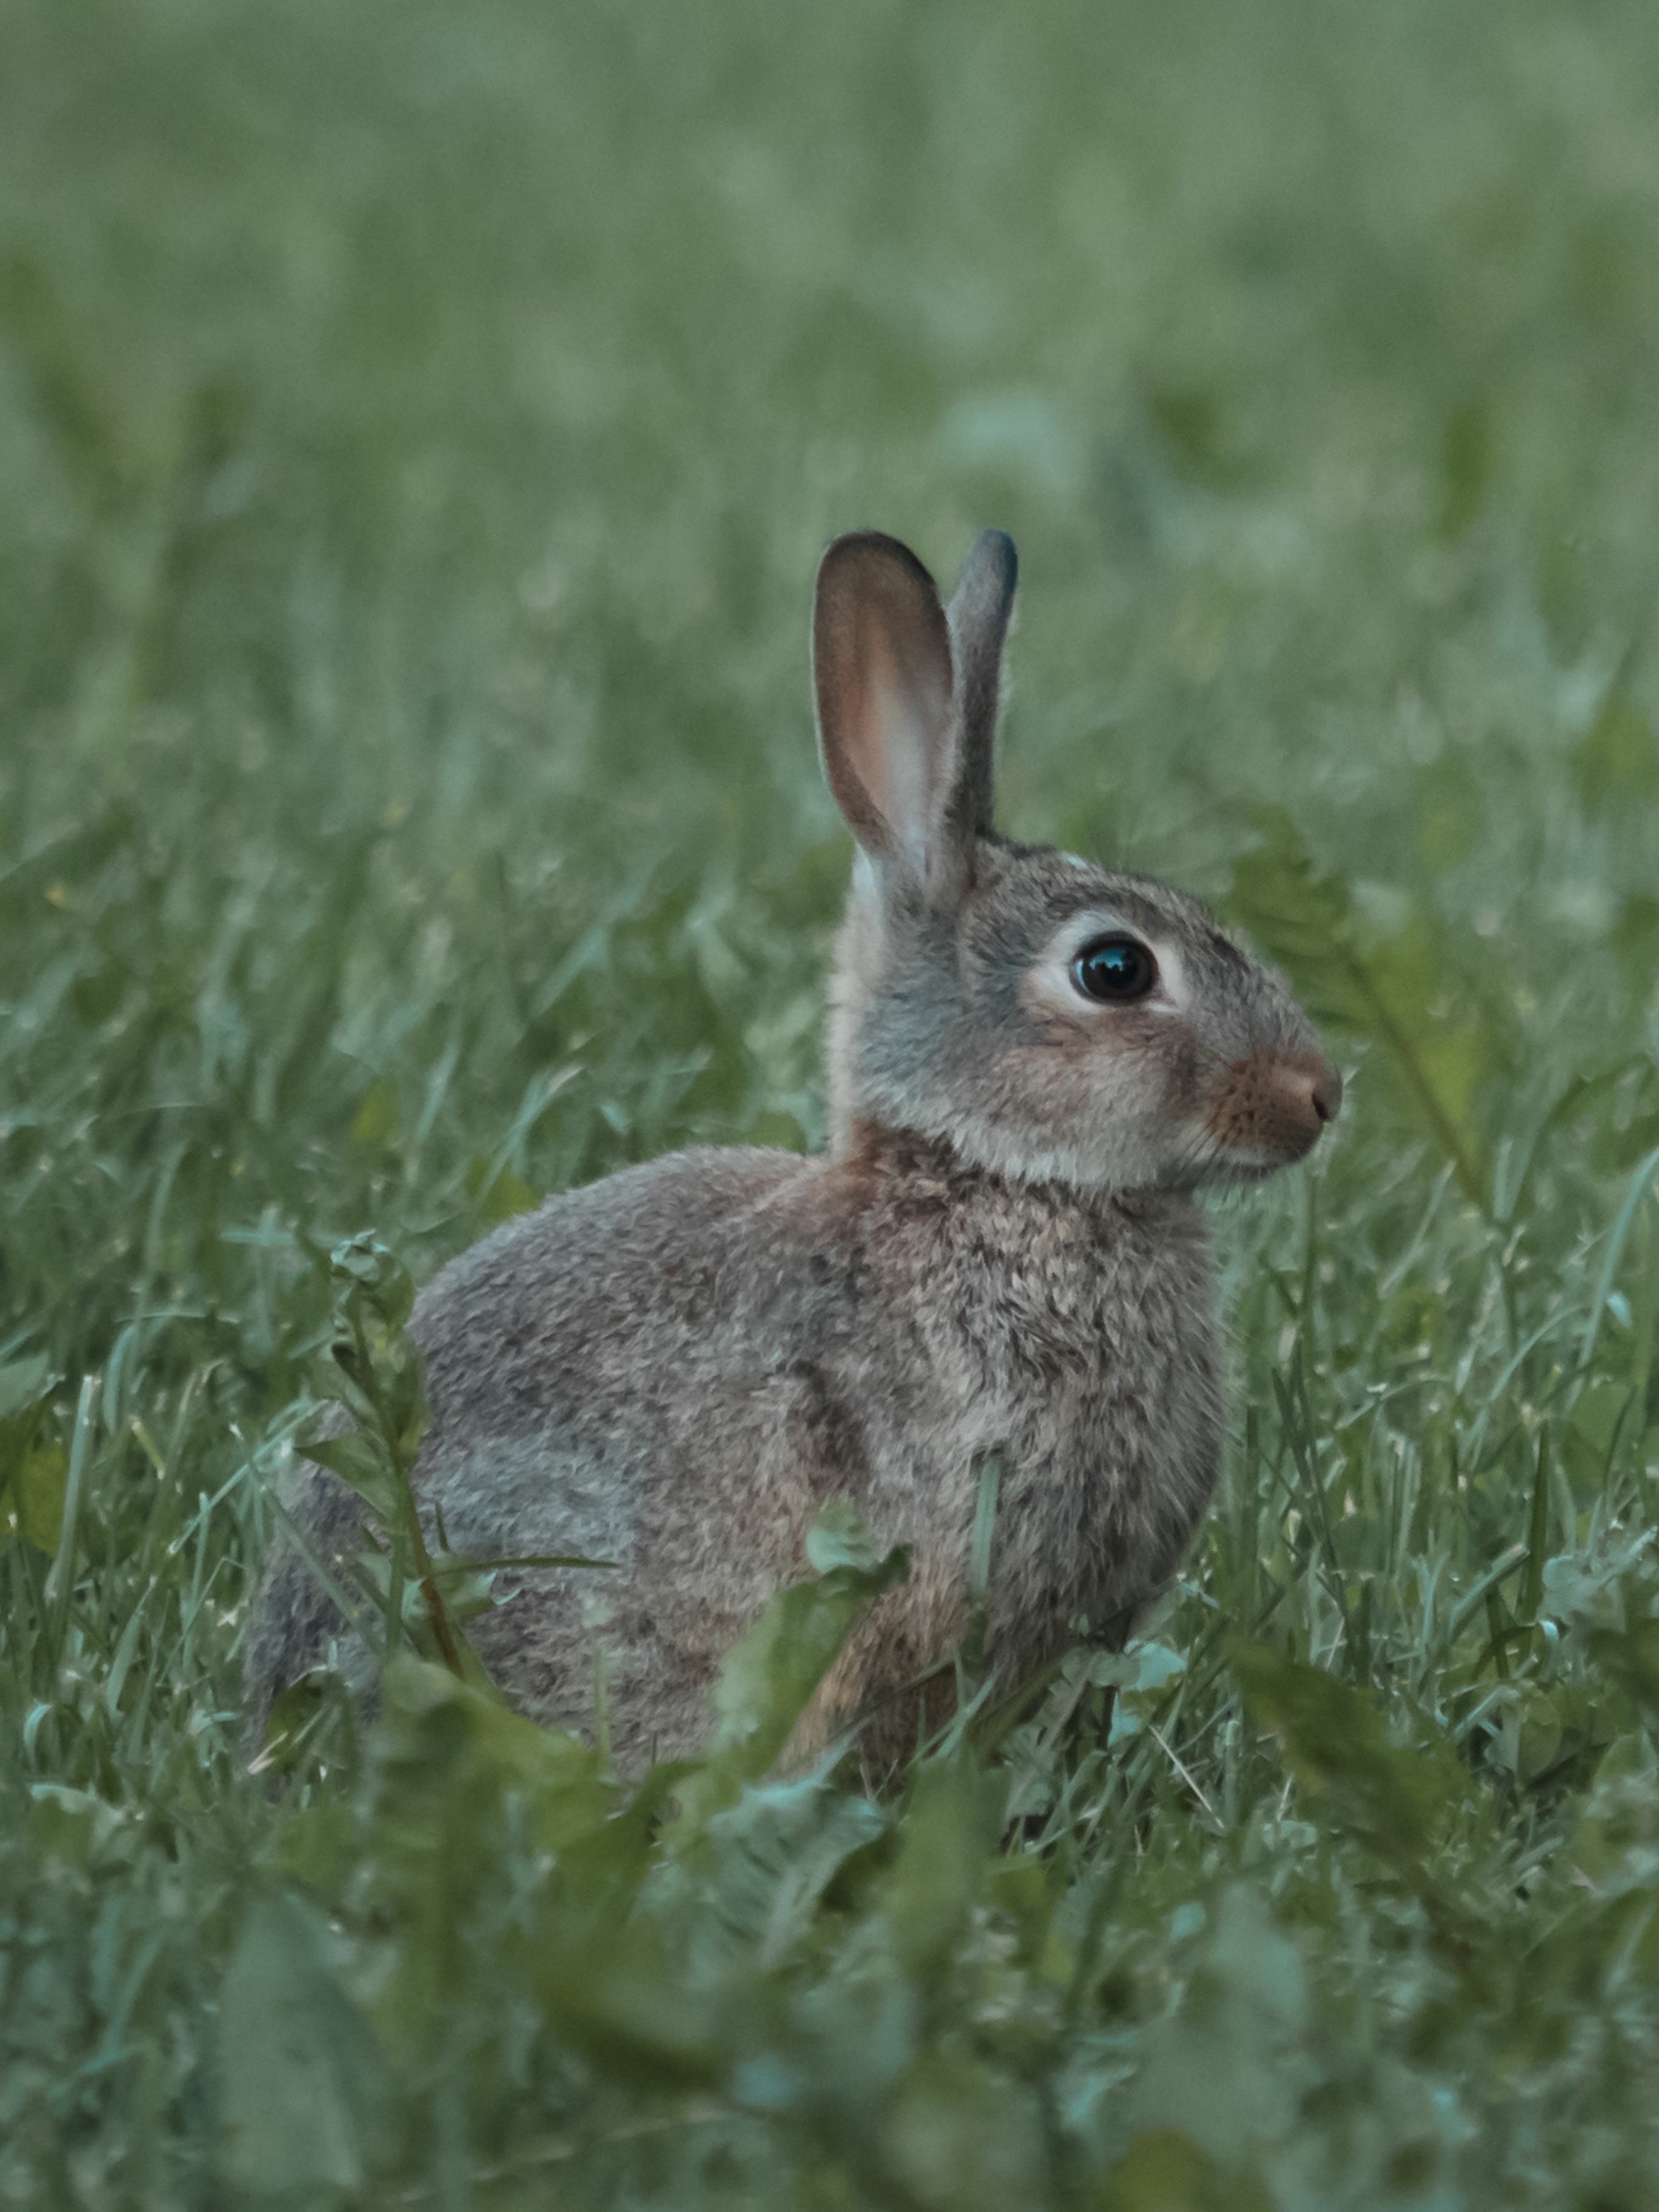 141290 Screensavers and Wallpapers Rabbit for phone. Download animals, grass, animal, profile, rabbit pictures for free